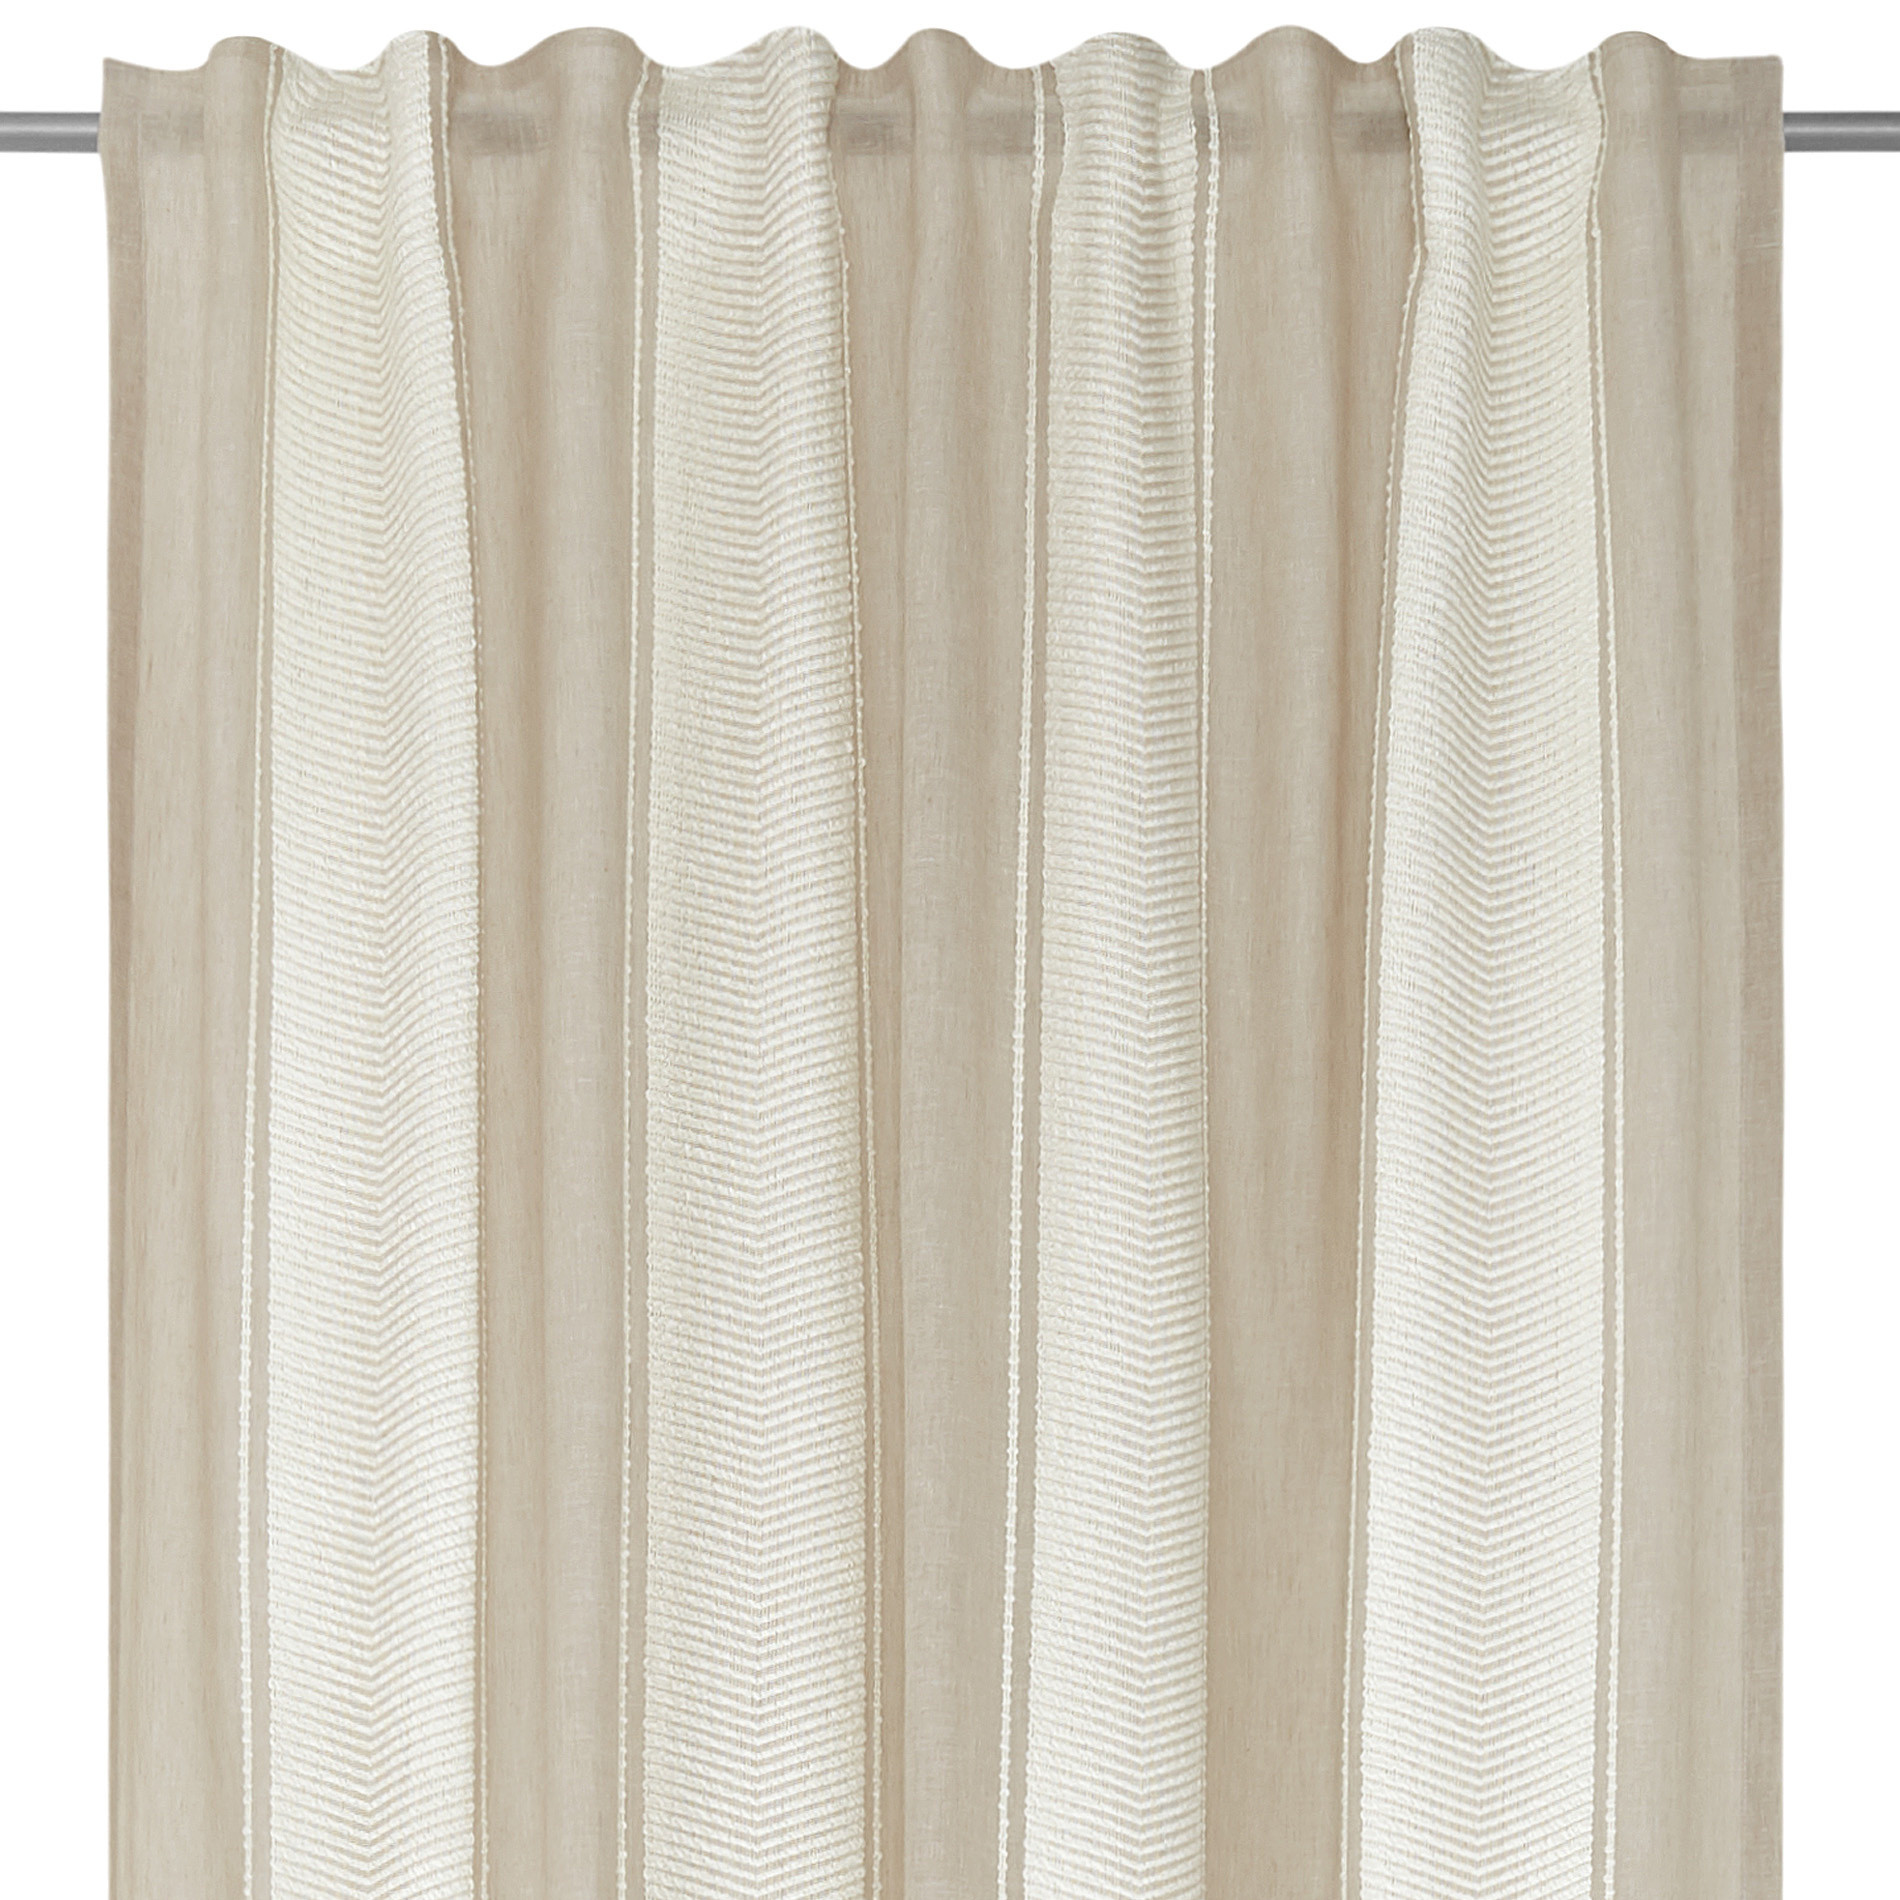 Jacquard curtain with hidden loops, Light Beige, large image number 2